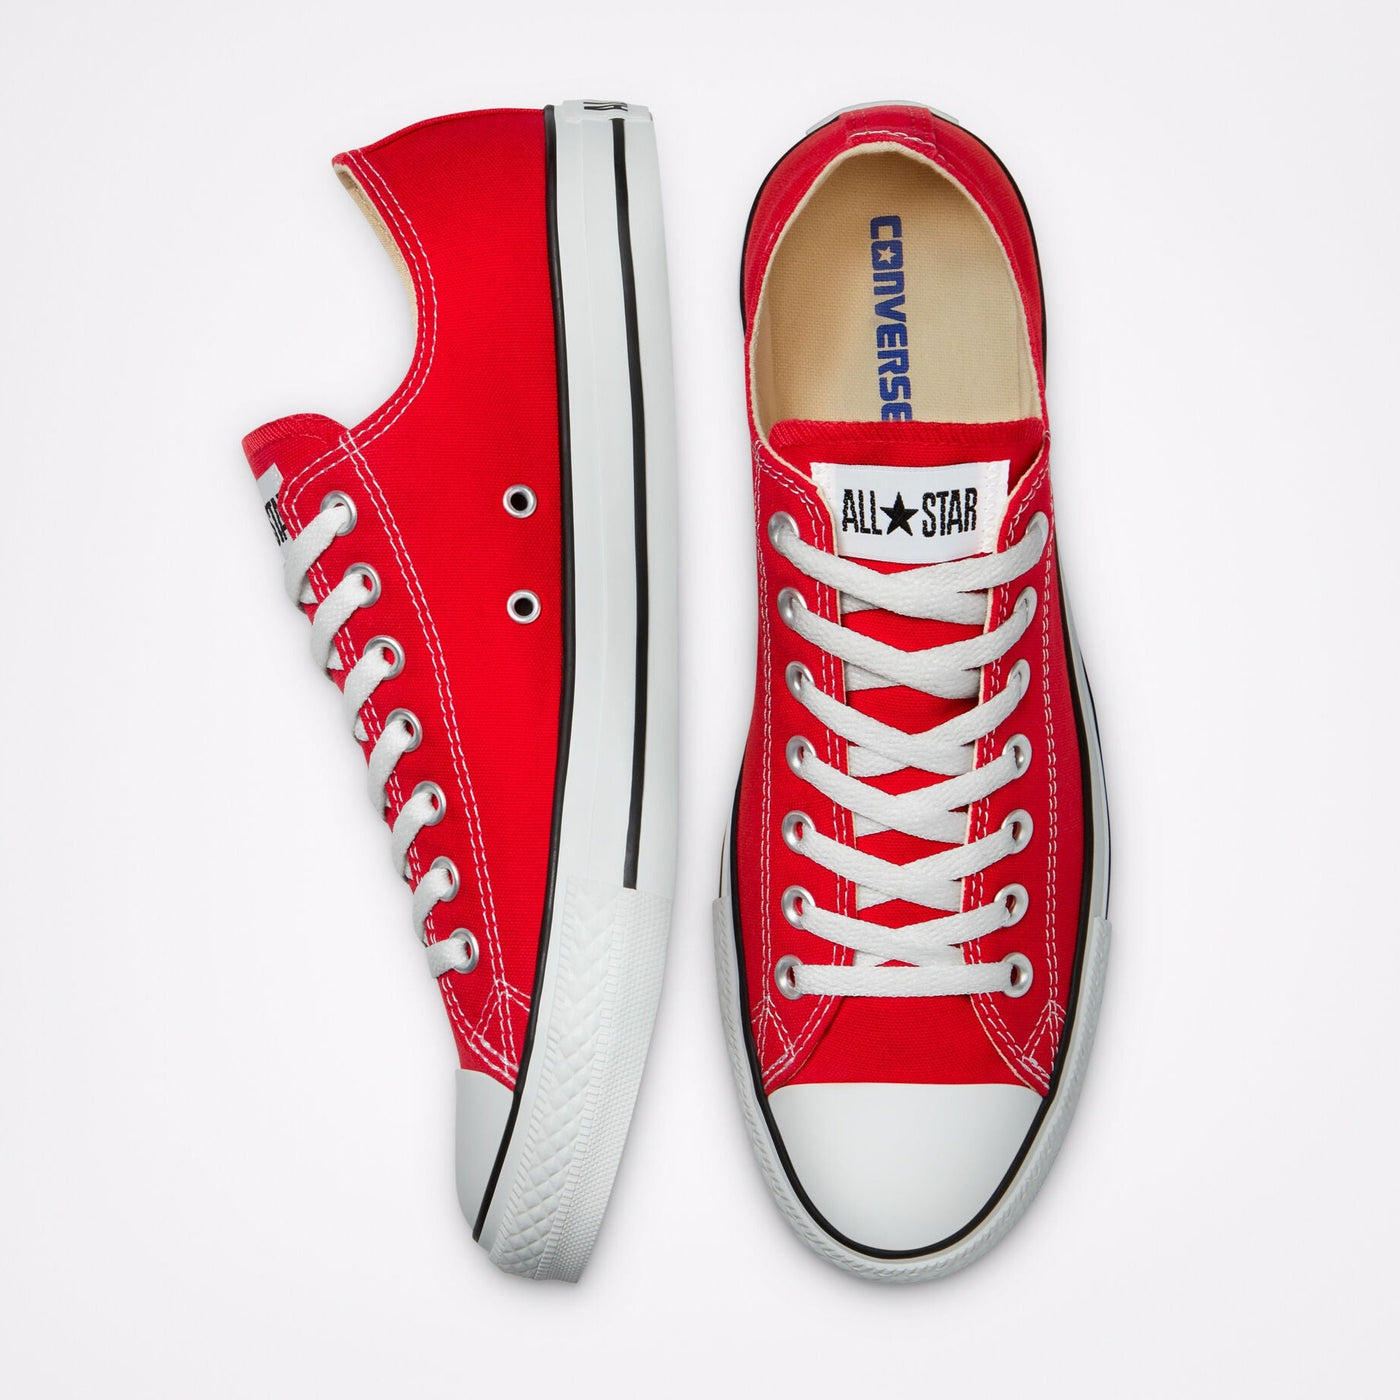 Converse Chuck Taylor All Star Classic Low Top Red